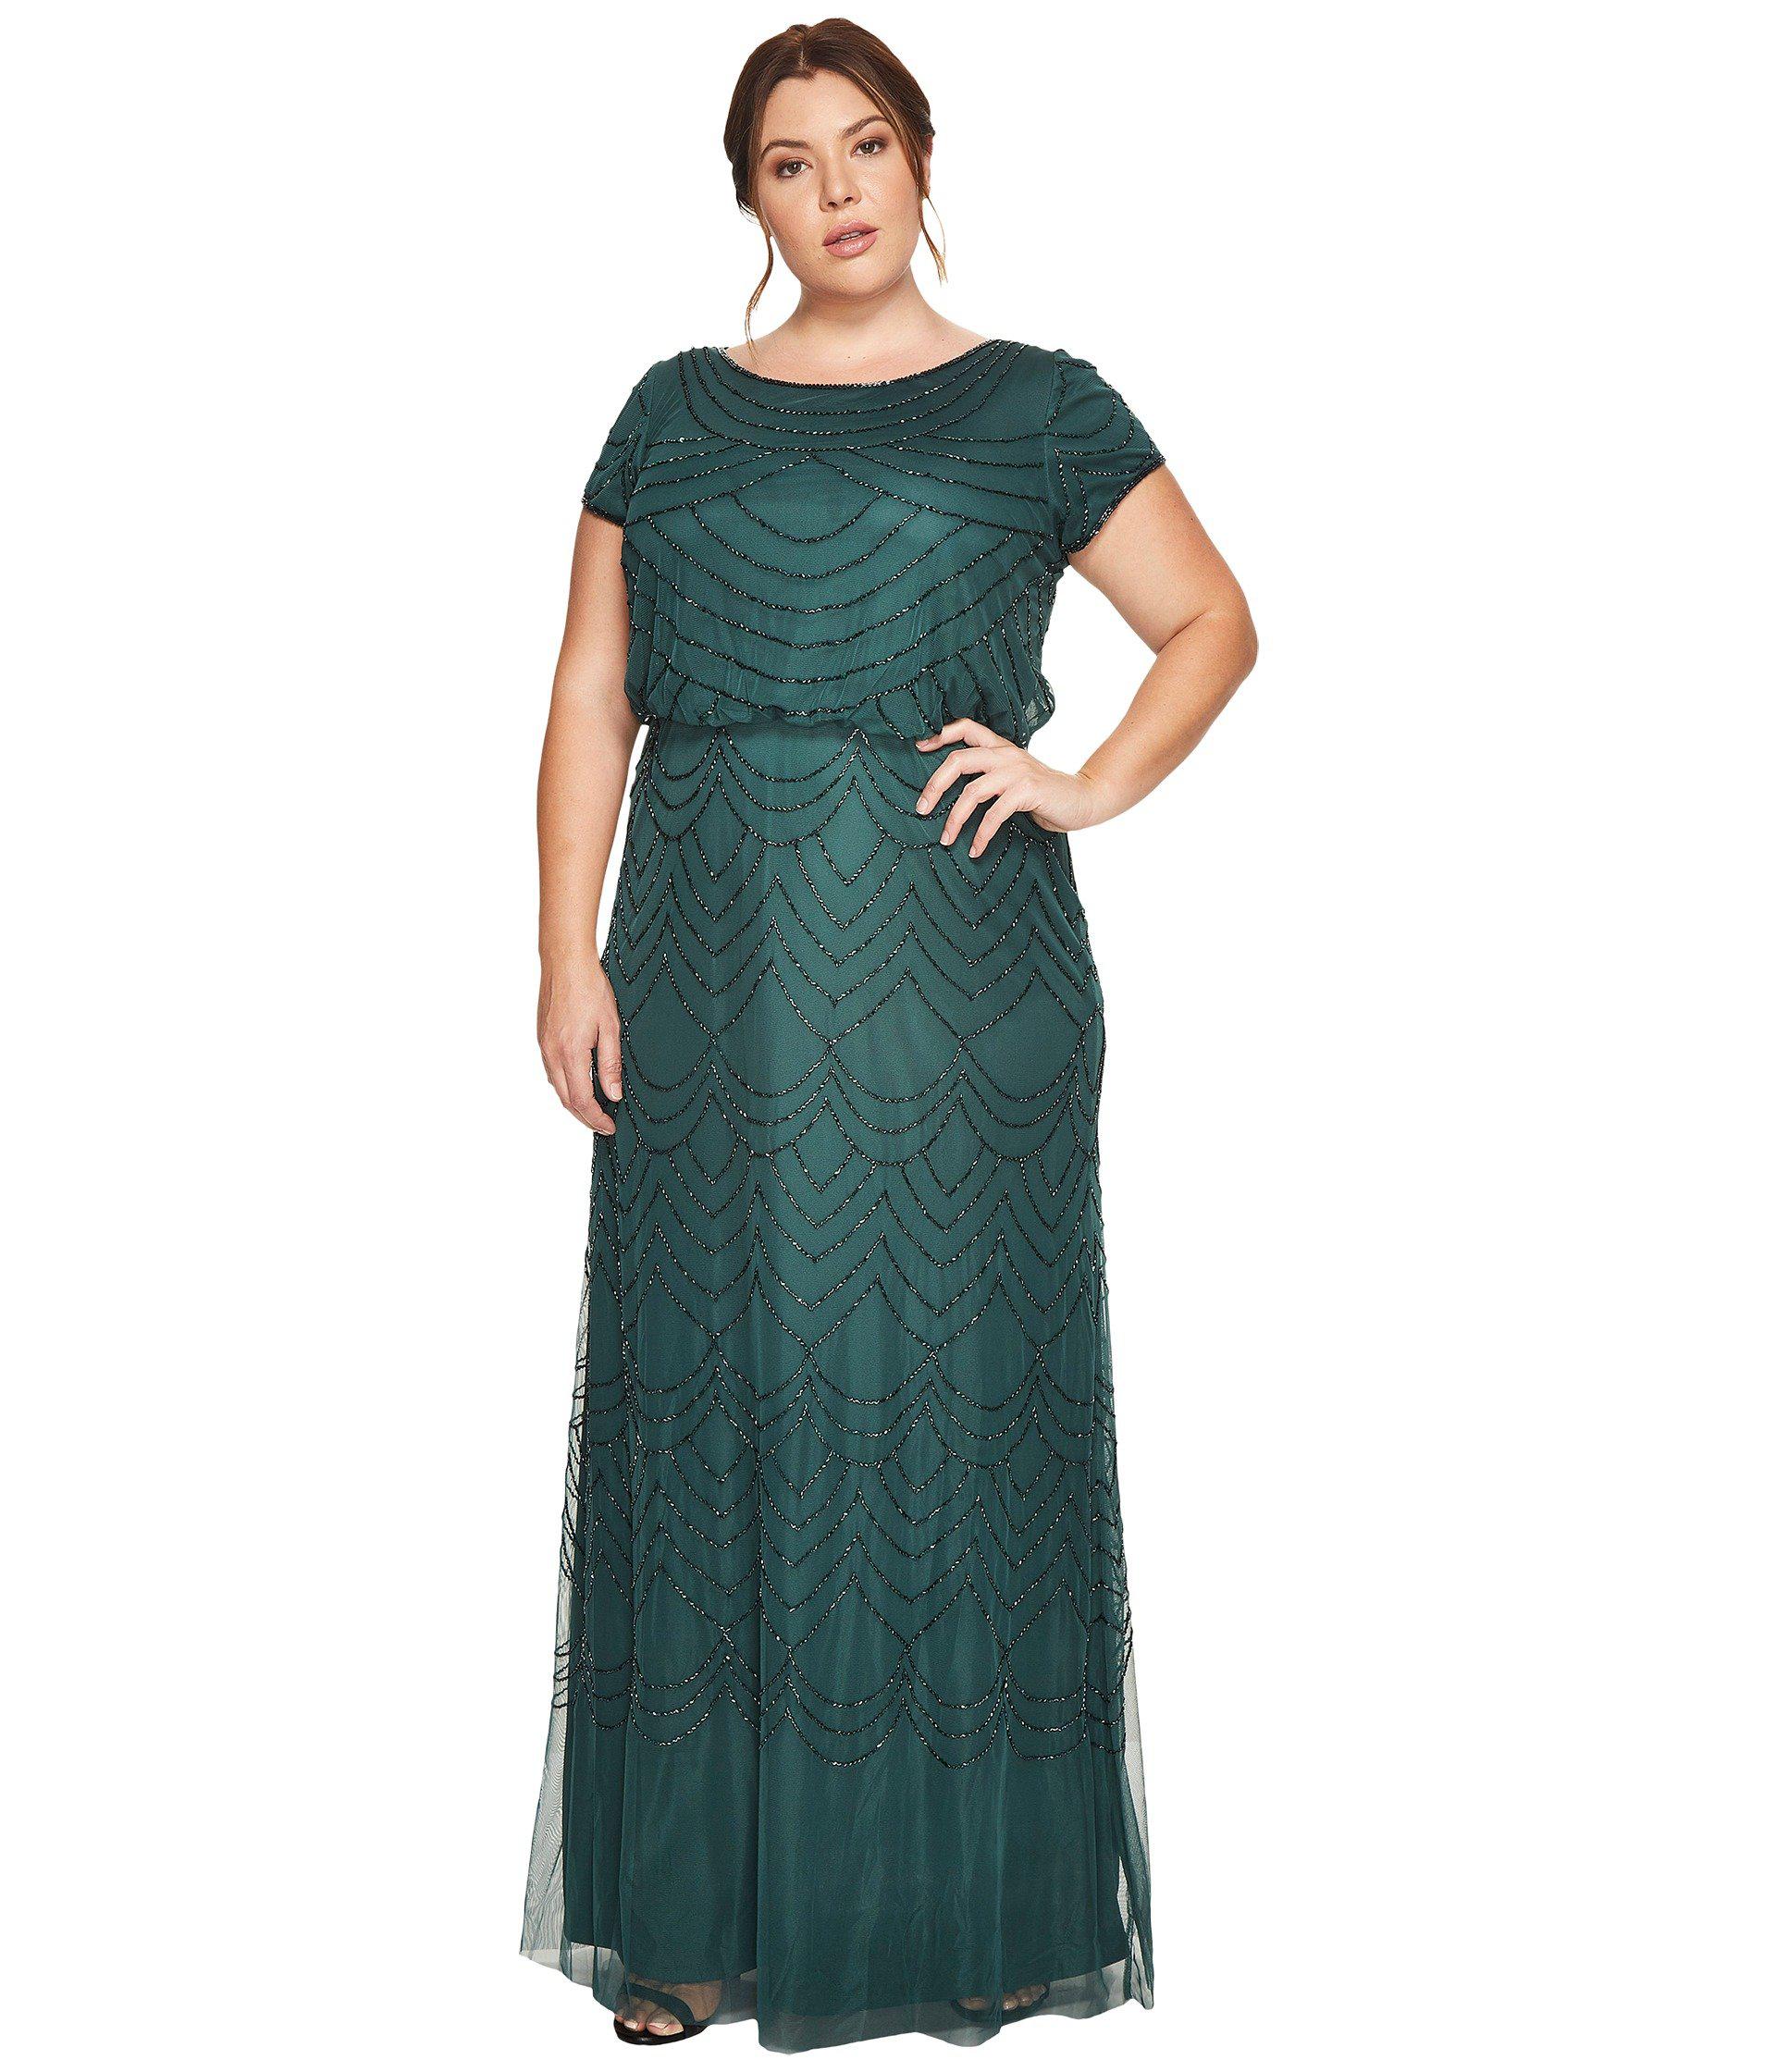 Adrianna Papell Synthetic Plus Size Short Sleeve Blouson Beaded Gown in